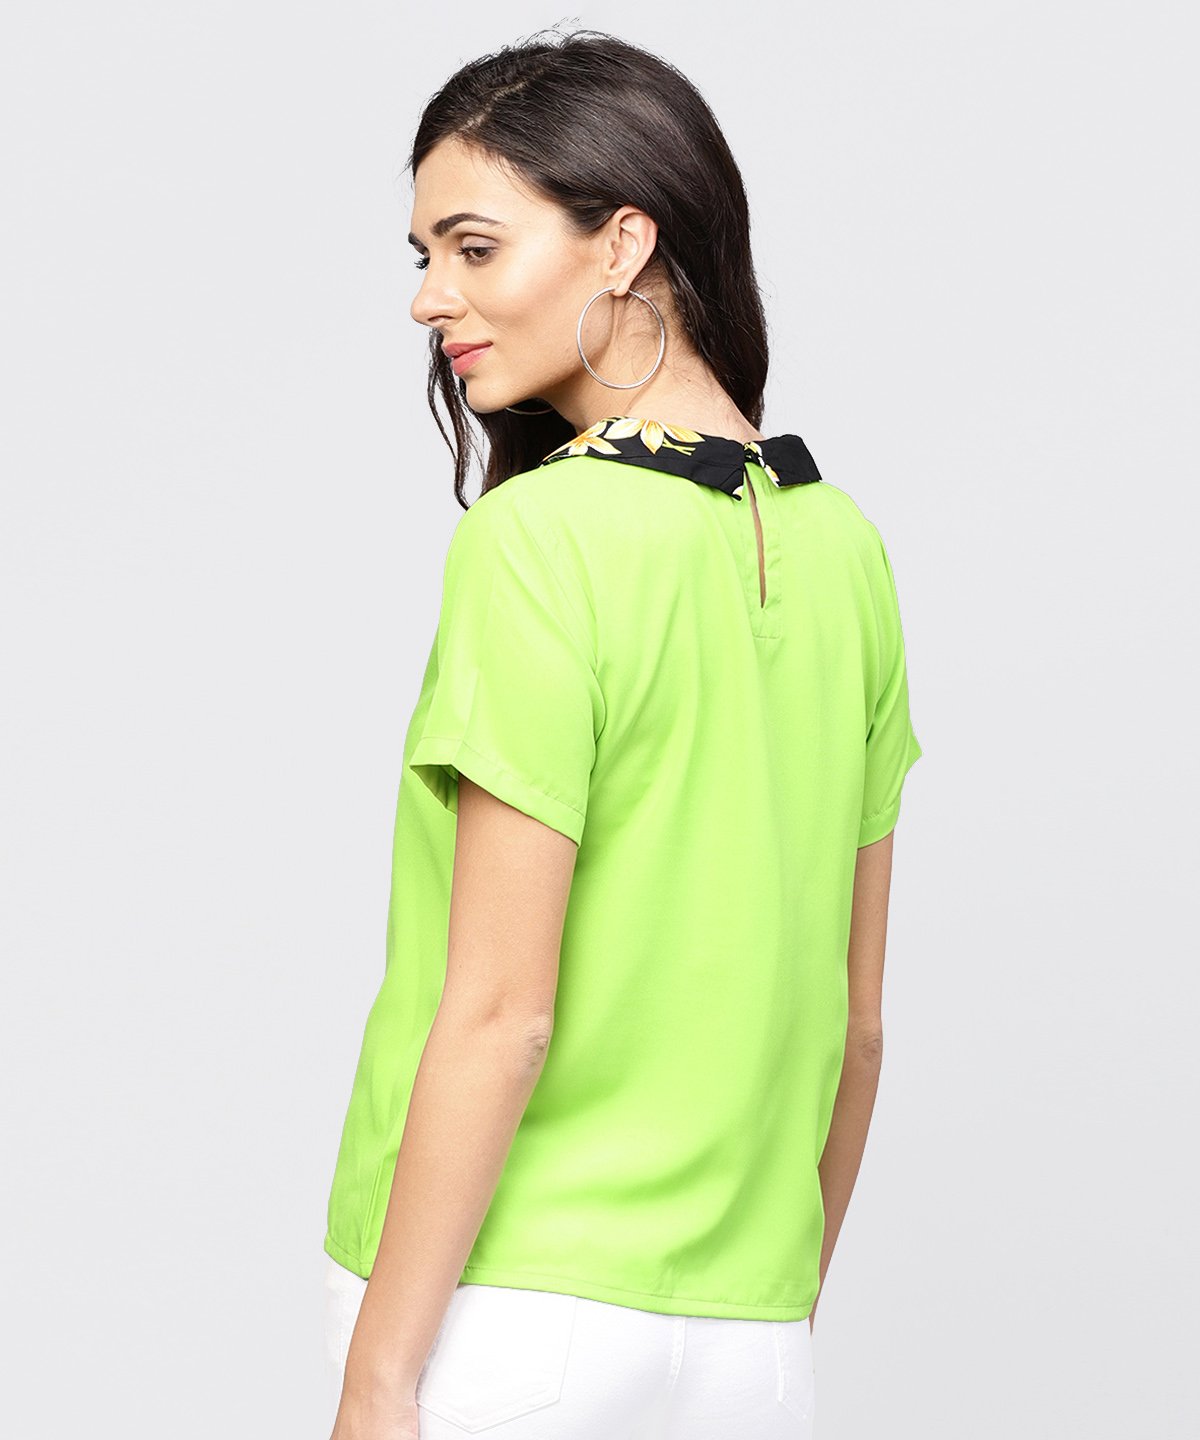 Women's Parrot Green Top With Half Sleeves And Collar - Nayo Clothing